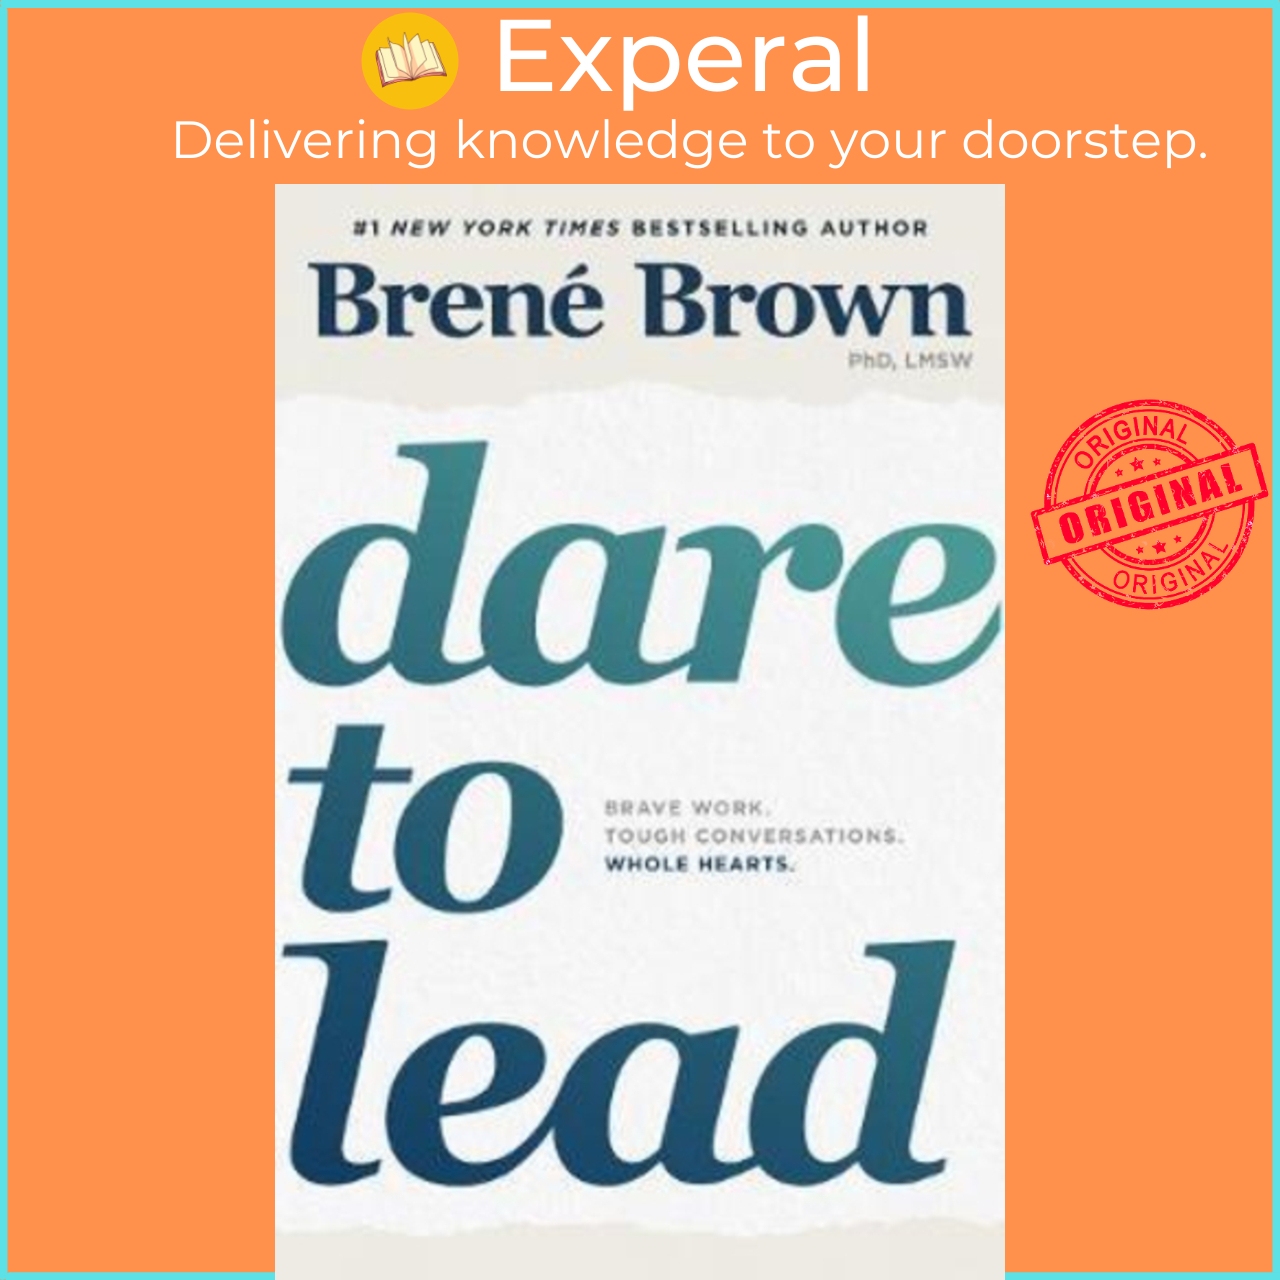 paperback)　Lead　to　Dare　by　Lazada　Brave　Brown　Hearts.　Conversations.　Work.　edition,　Whole　(UK　Brene　Tough　Singapore